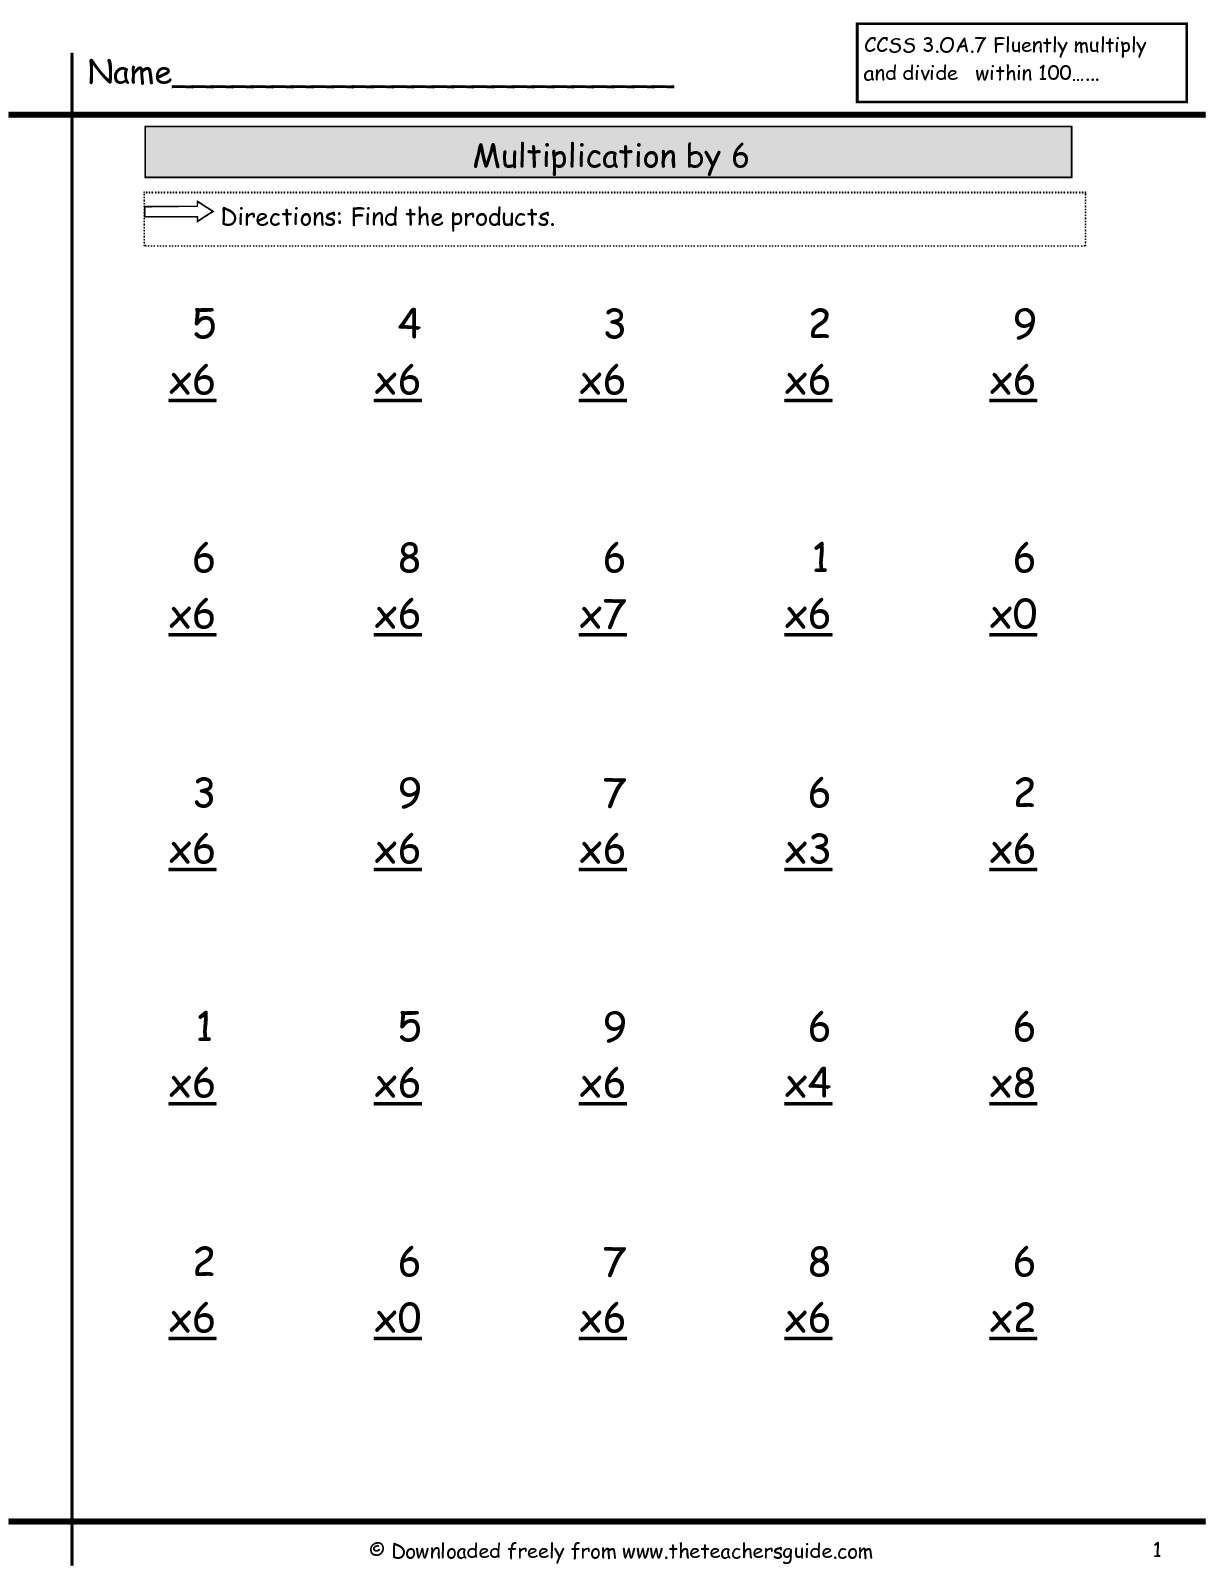 Multiplication Facts Worksheets From The Teacher&amp;#039;s Guide pertaining to Printable Multiplication By 8